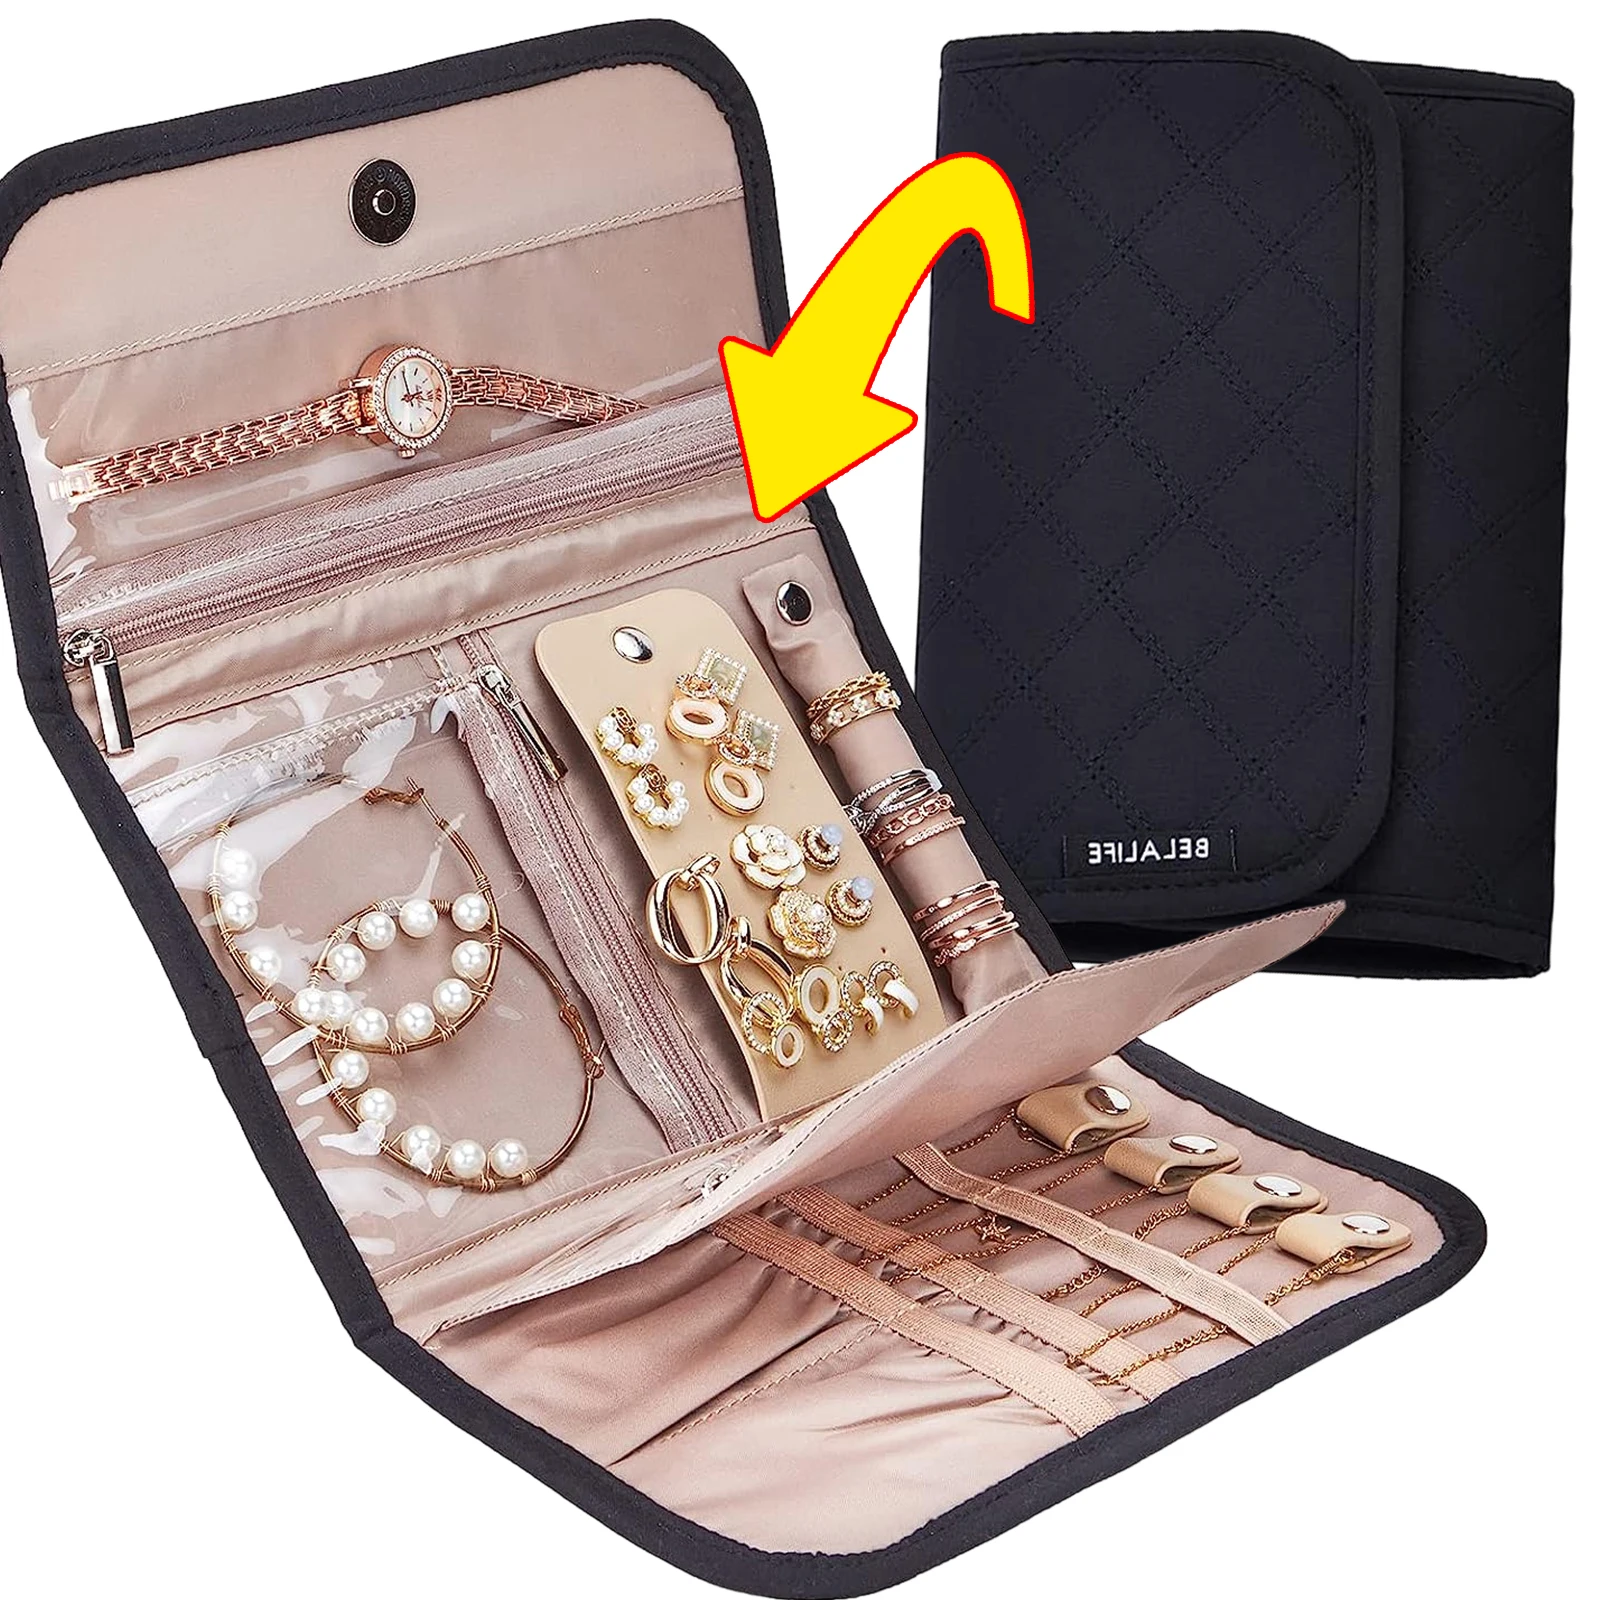 Roll Foldable Jewelry Case Travel Jewelry Organizer Portable for Journey Earrings Rings Diamond Necklaces Brooches Storage Bag big size jewelry box velet necklace rings earrings jewelry boxes for women portable dispiay stand bangles storage organizer